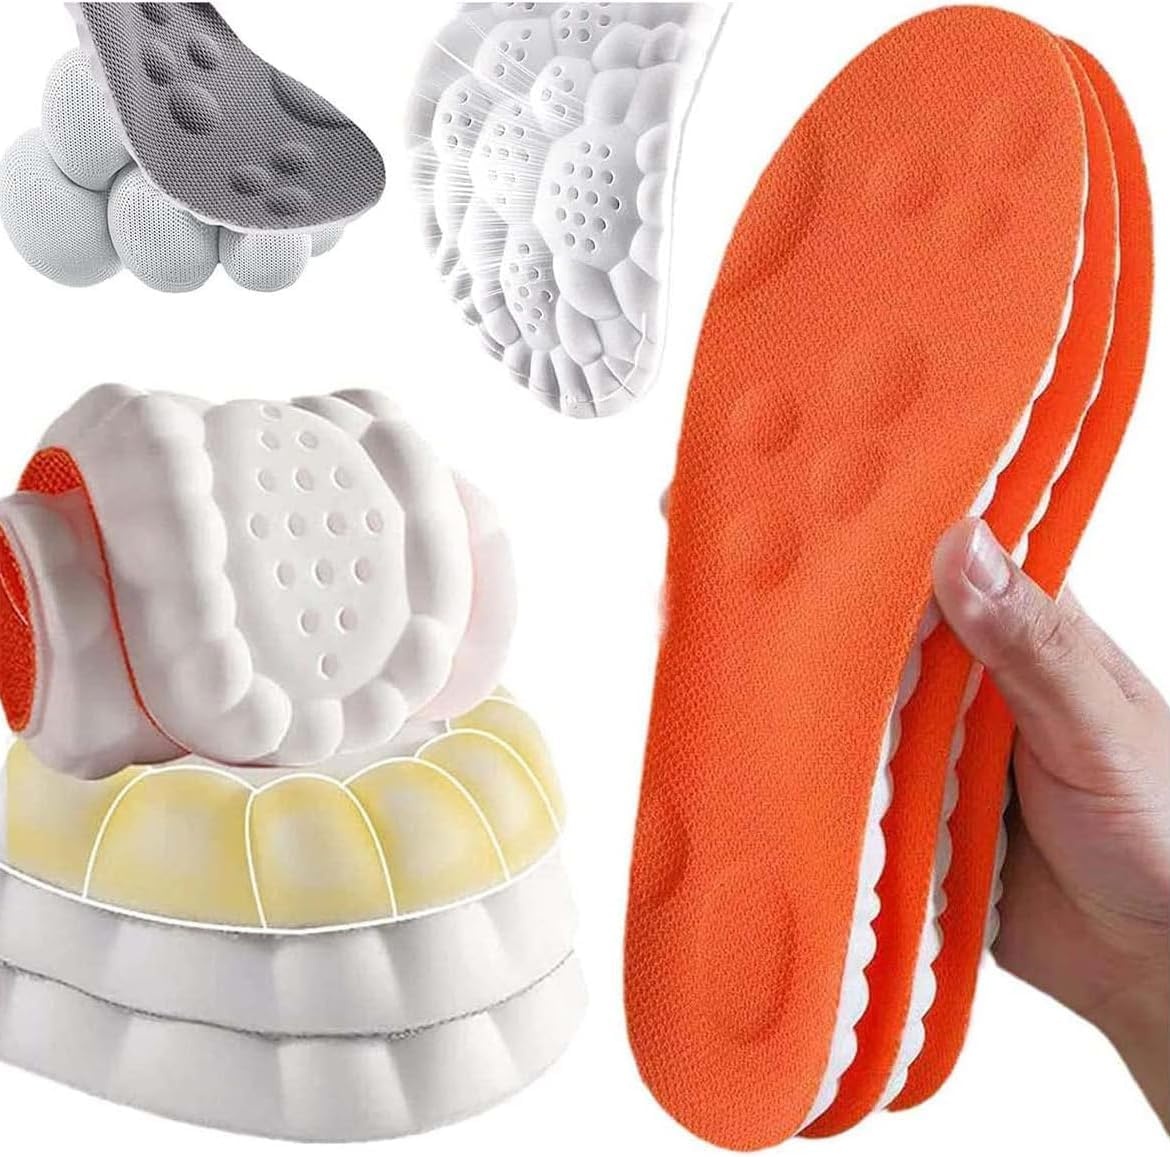 4D Insoles-4D Cloud Technology Insole,Metatarsal Orthotic Insoles Arch Supports Inserts, High-Elastic Shock-Absorbing Insoles,Plantar Fasciitis, Ball of Foot Pain Relief (43-44, orange)